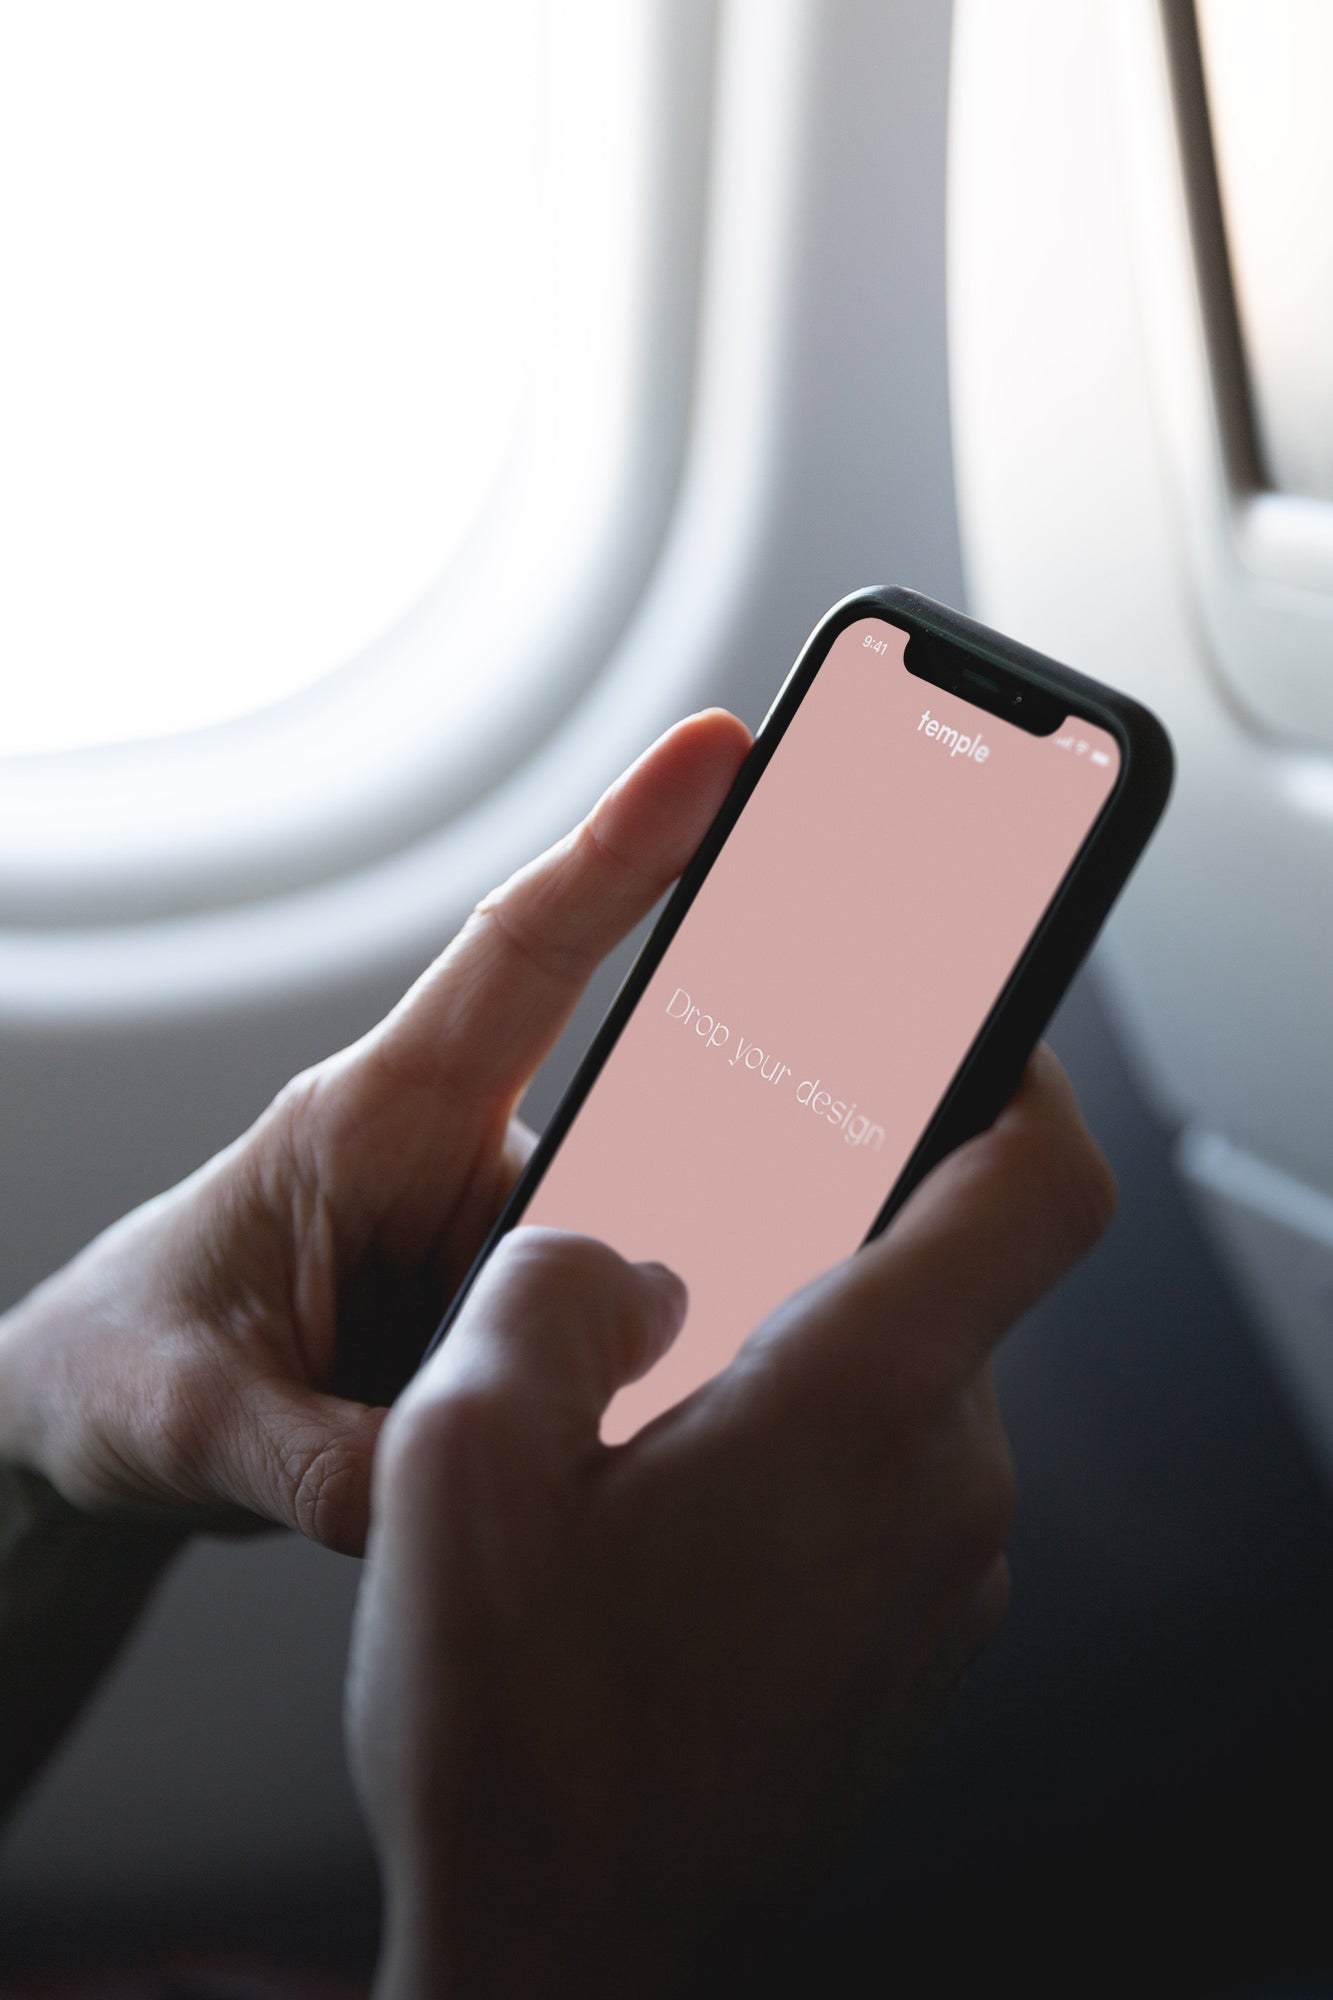 In Airplane With iPhone X Mockup